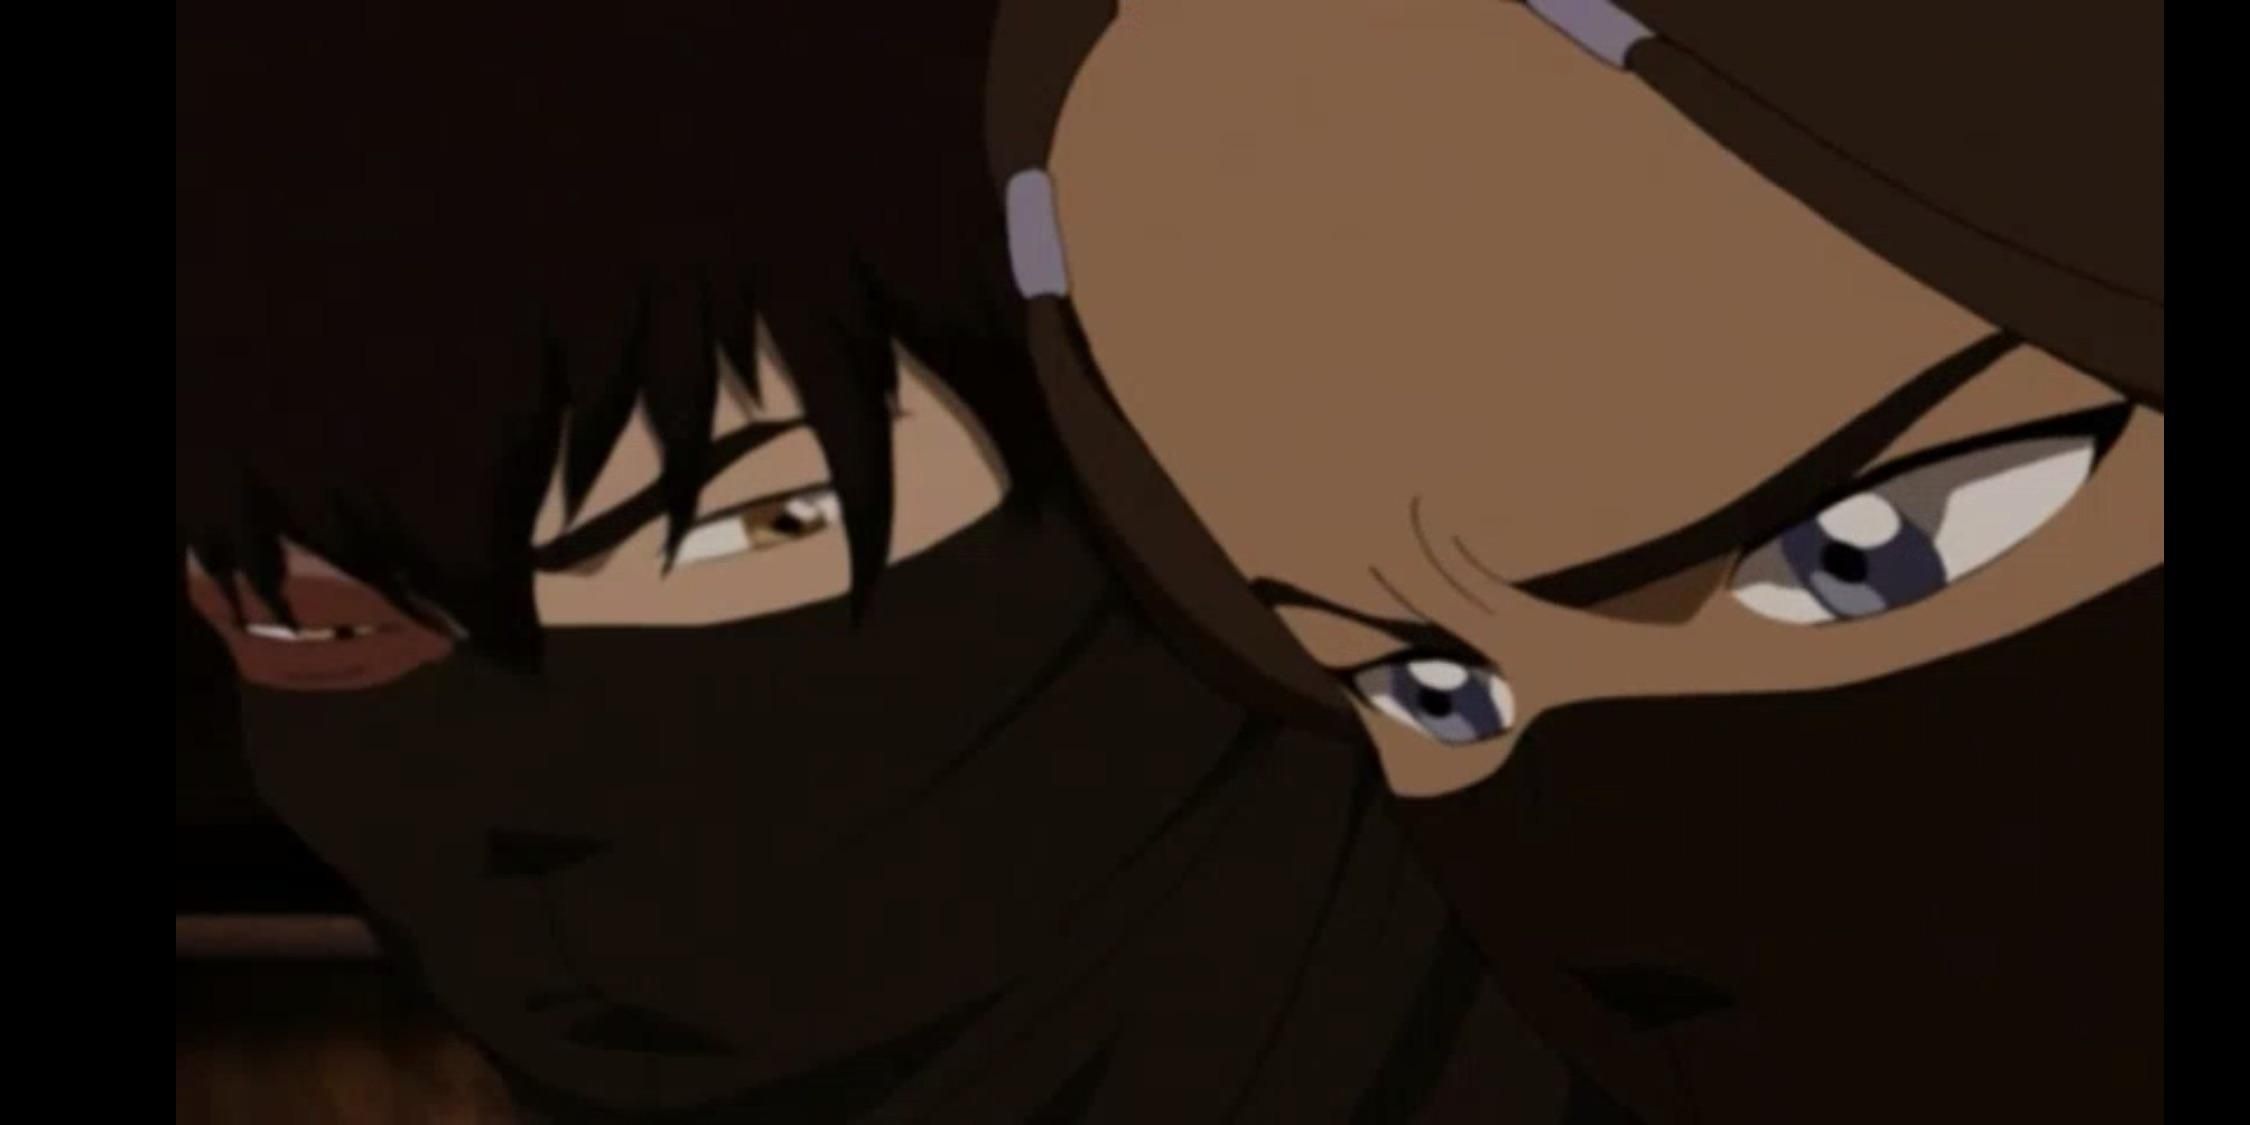 Katara and Zuko in the Southern Raiders episode of The Last Airbender